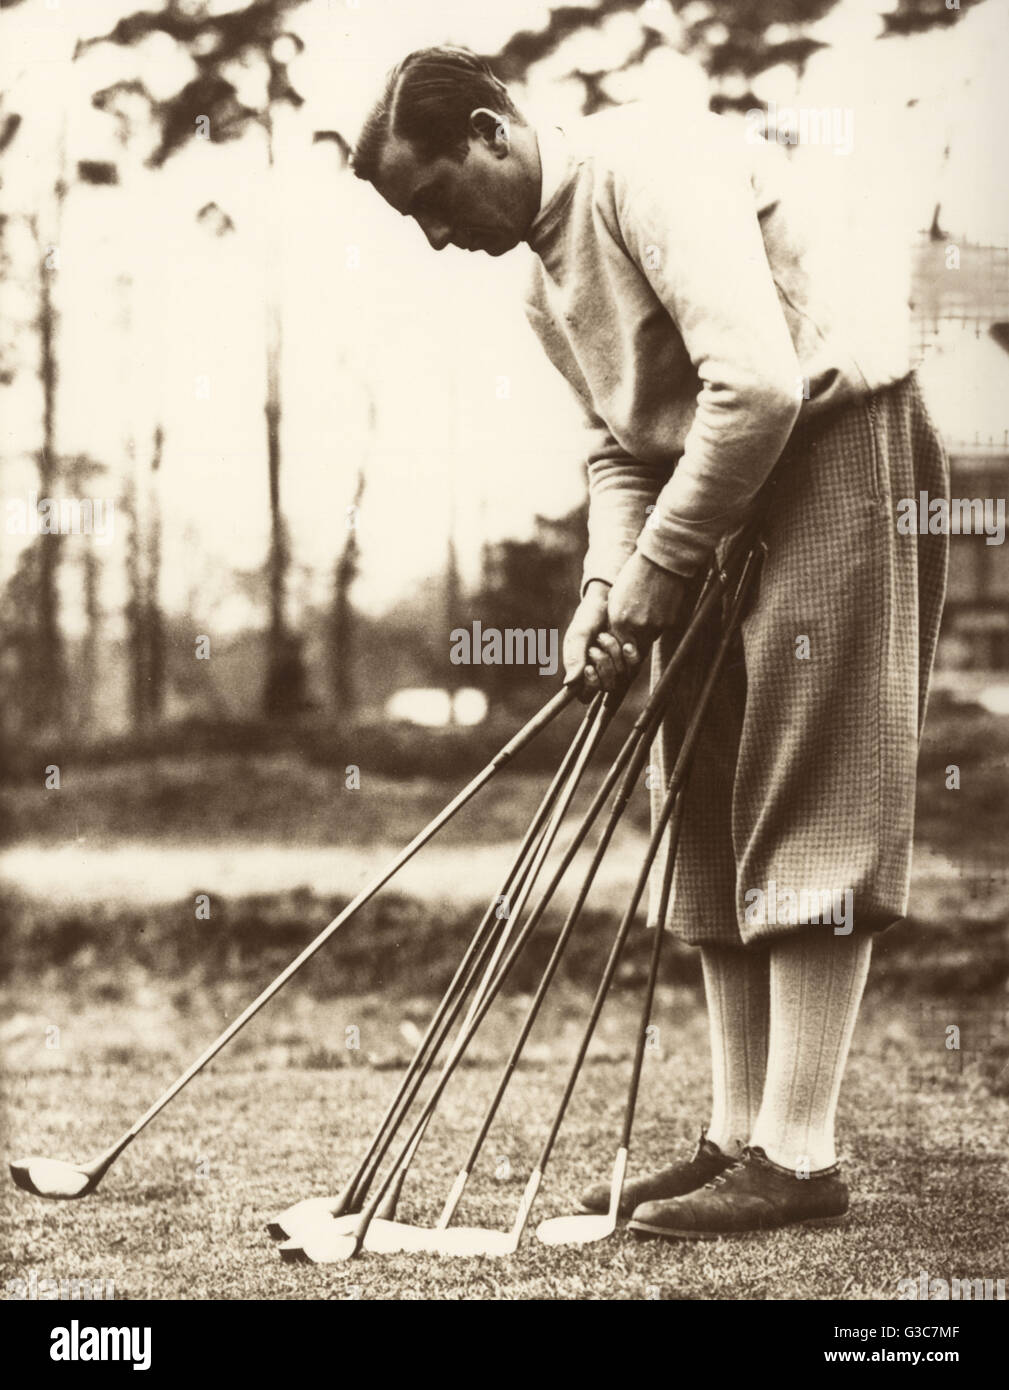 Sir Thomas Henry Cotton (1907-1987), English professional golfer who won three Open Championships, seen here on a golf course checking his clubs and putters.      Date: circa 1930s Stock Photo